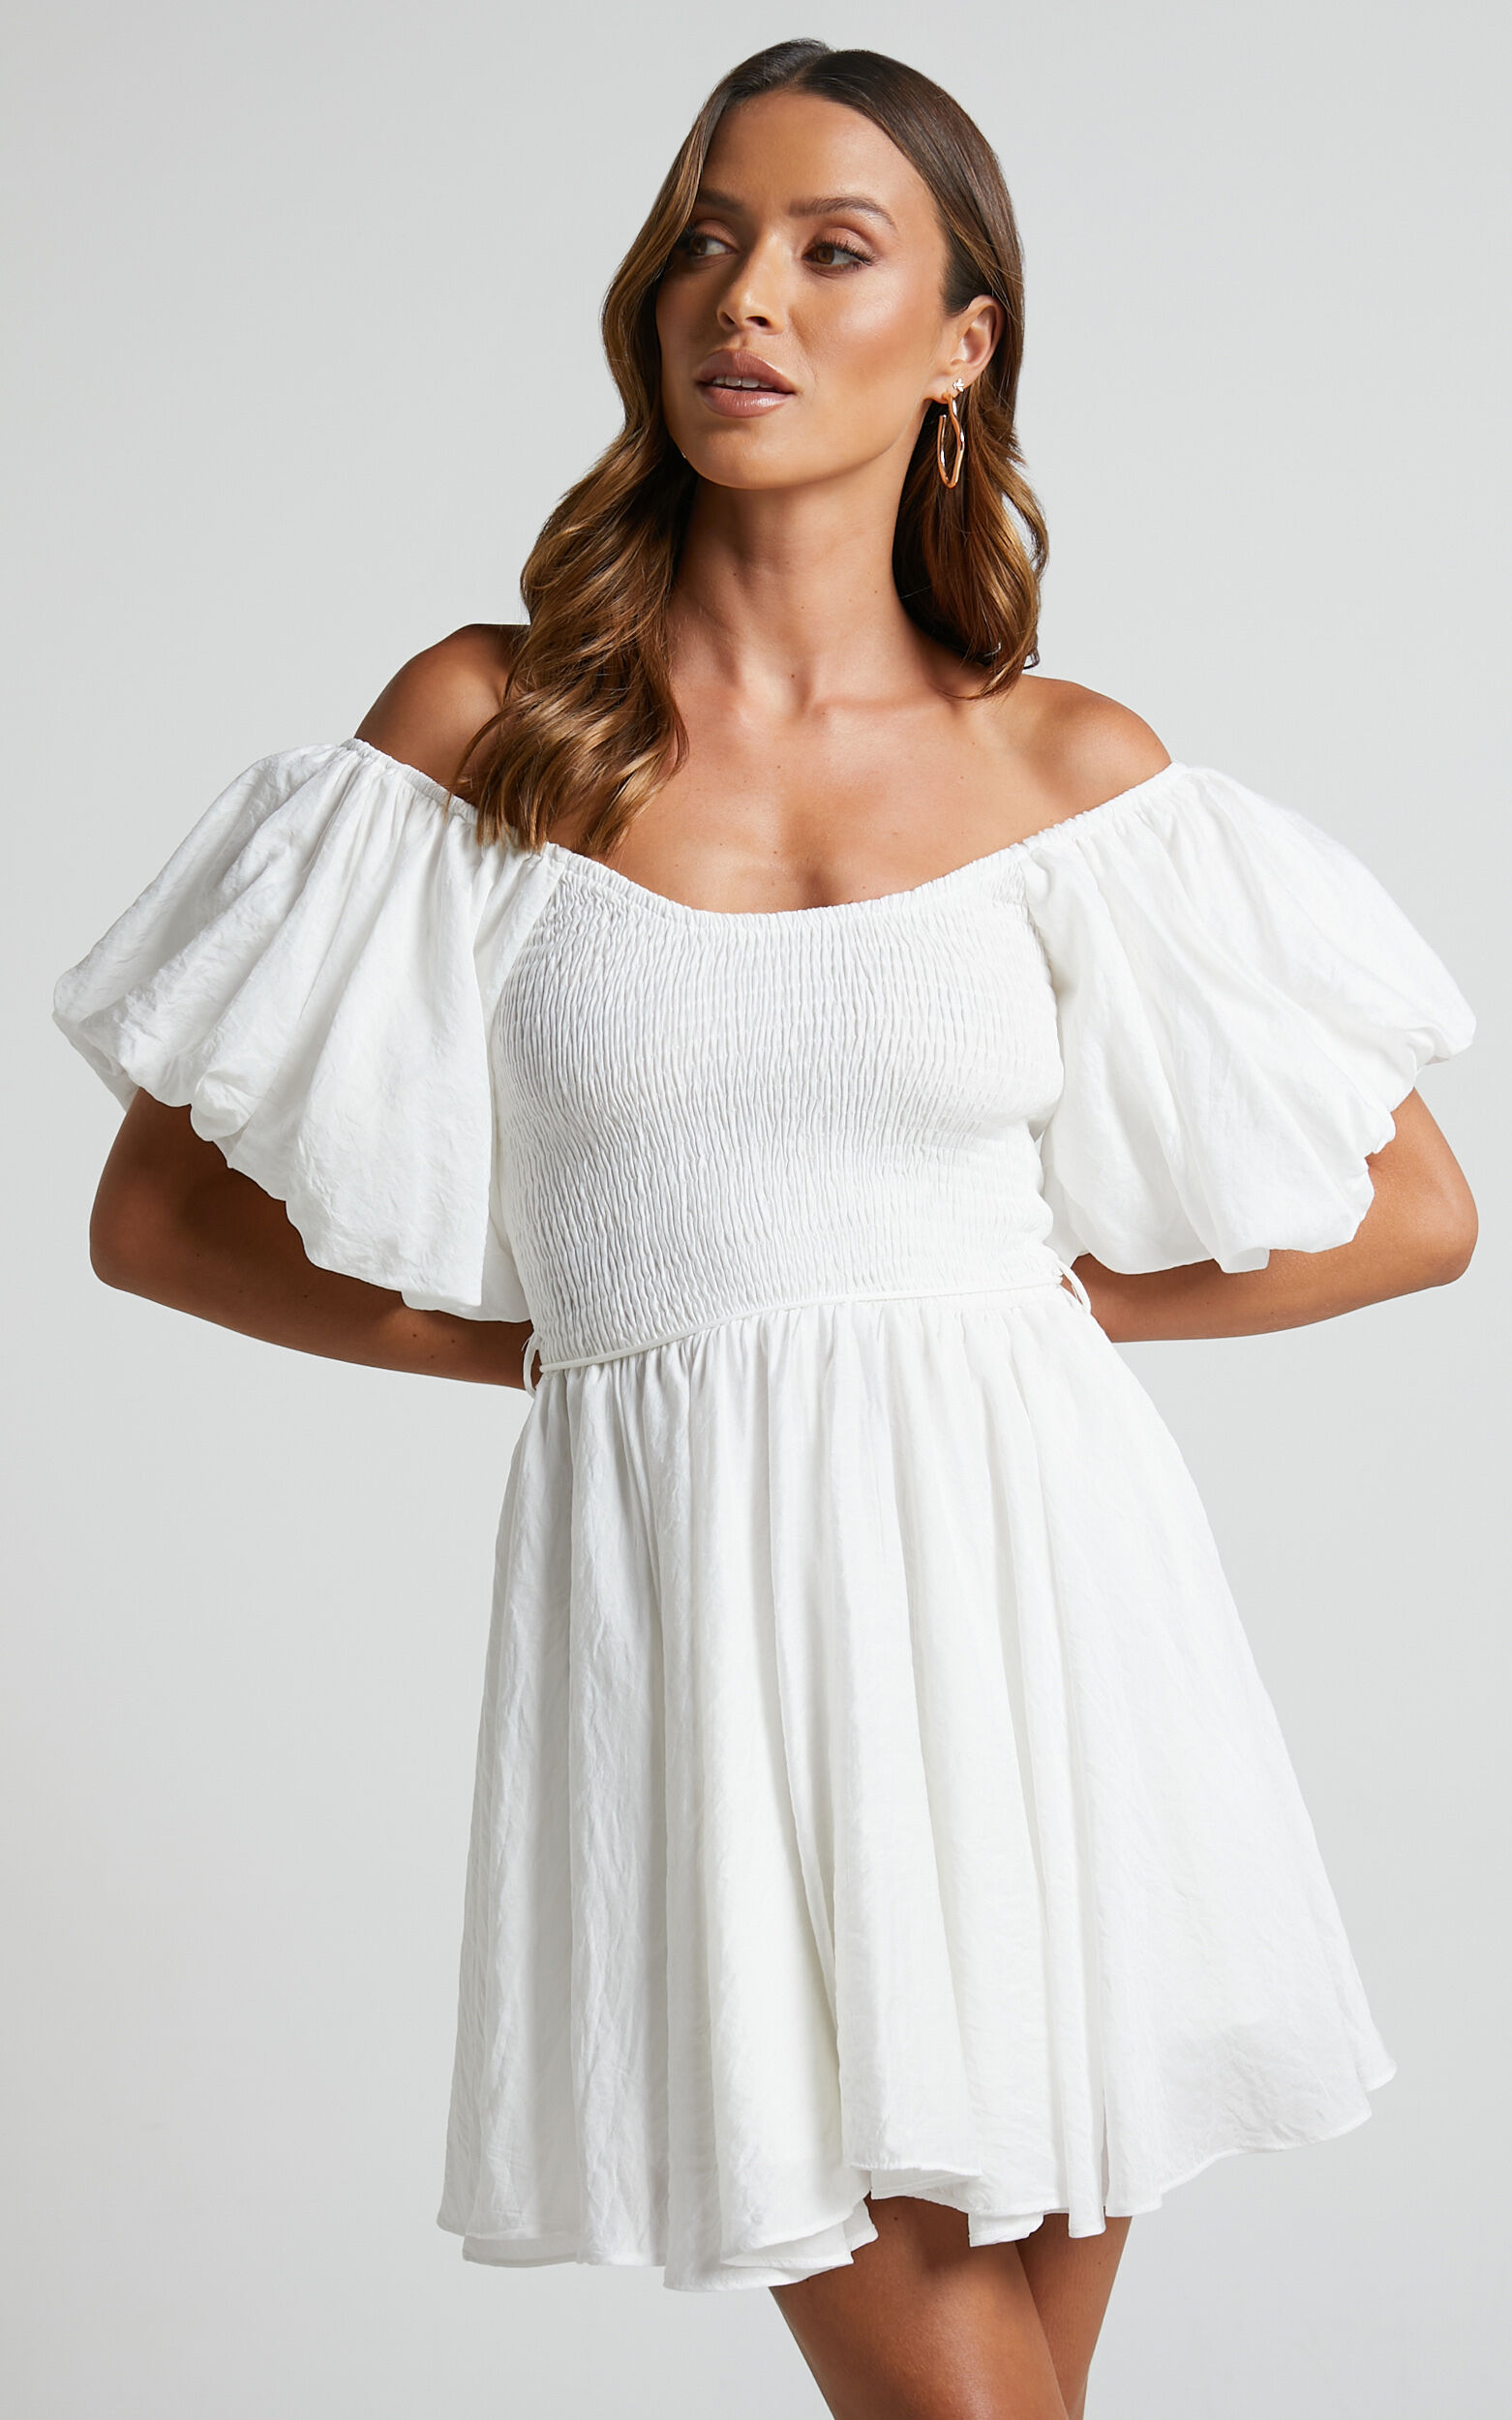 Cedlla Puff Sleeve Textured Mini Dress in White - 06, WHT1, super-hi-res image number null